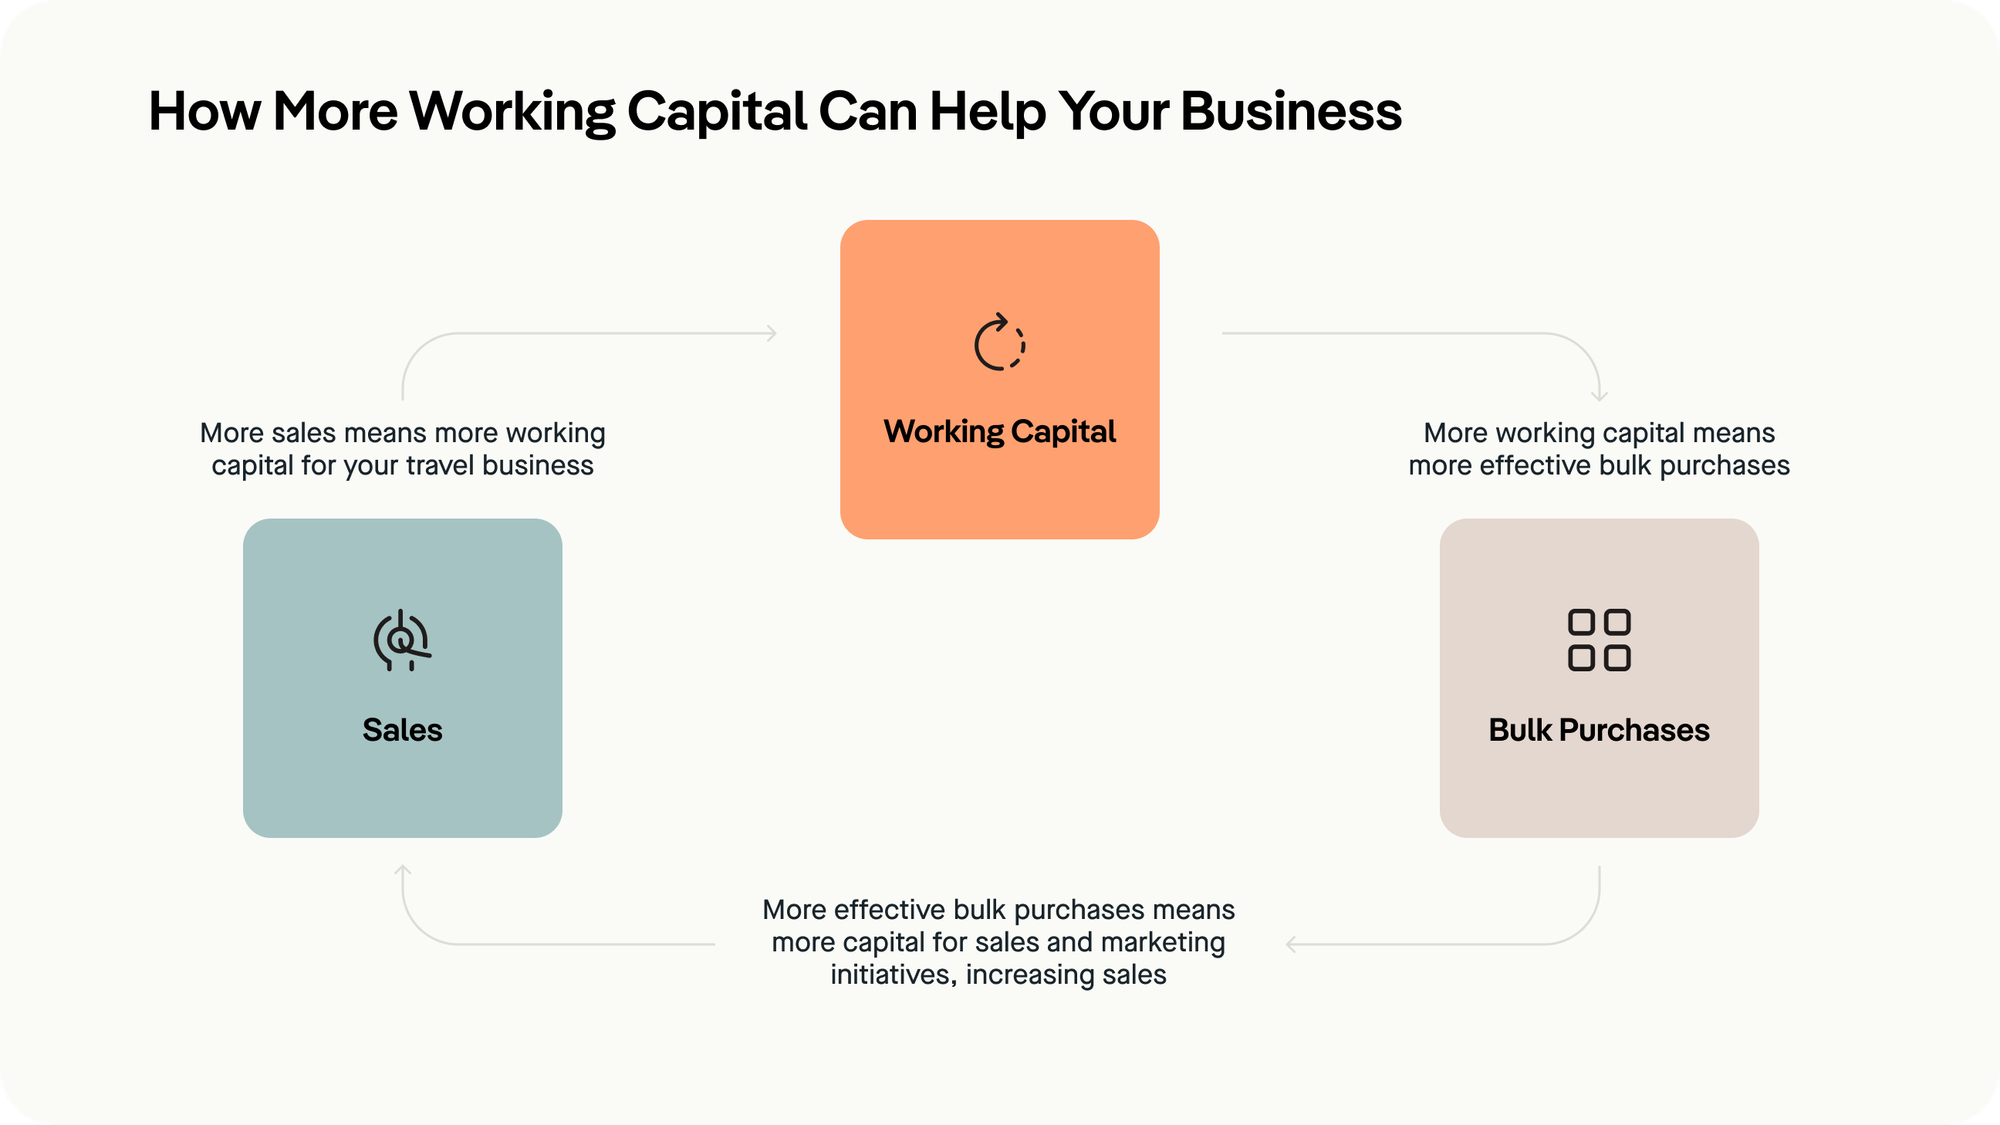 How higher working capital helps businesses